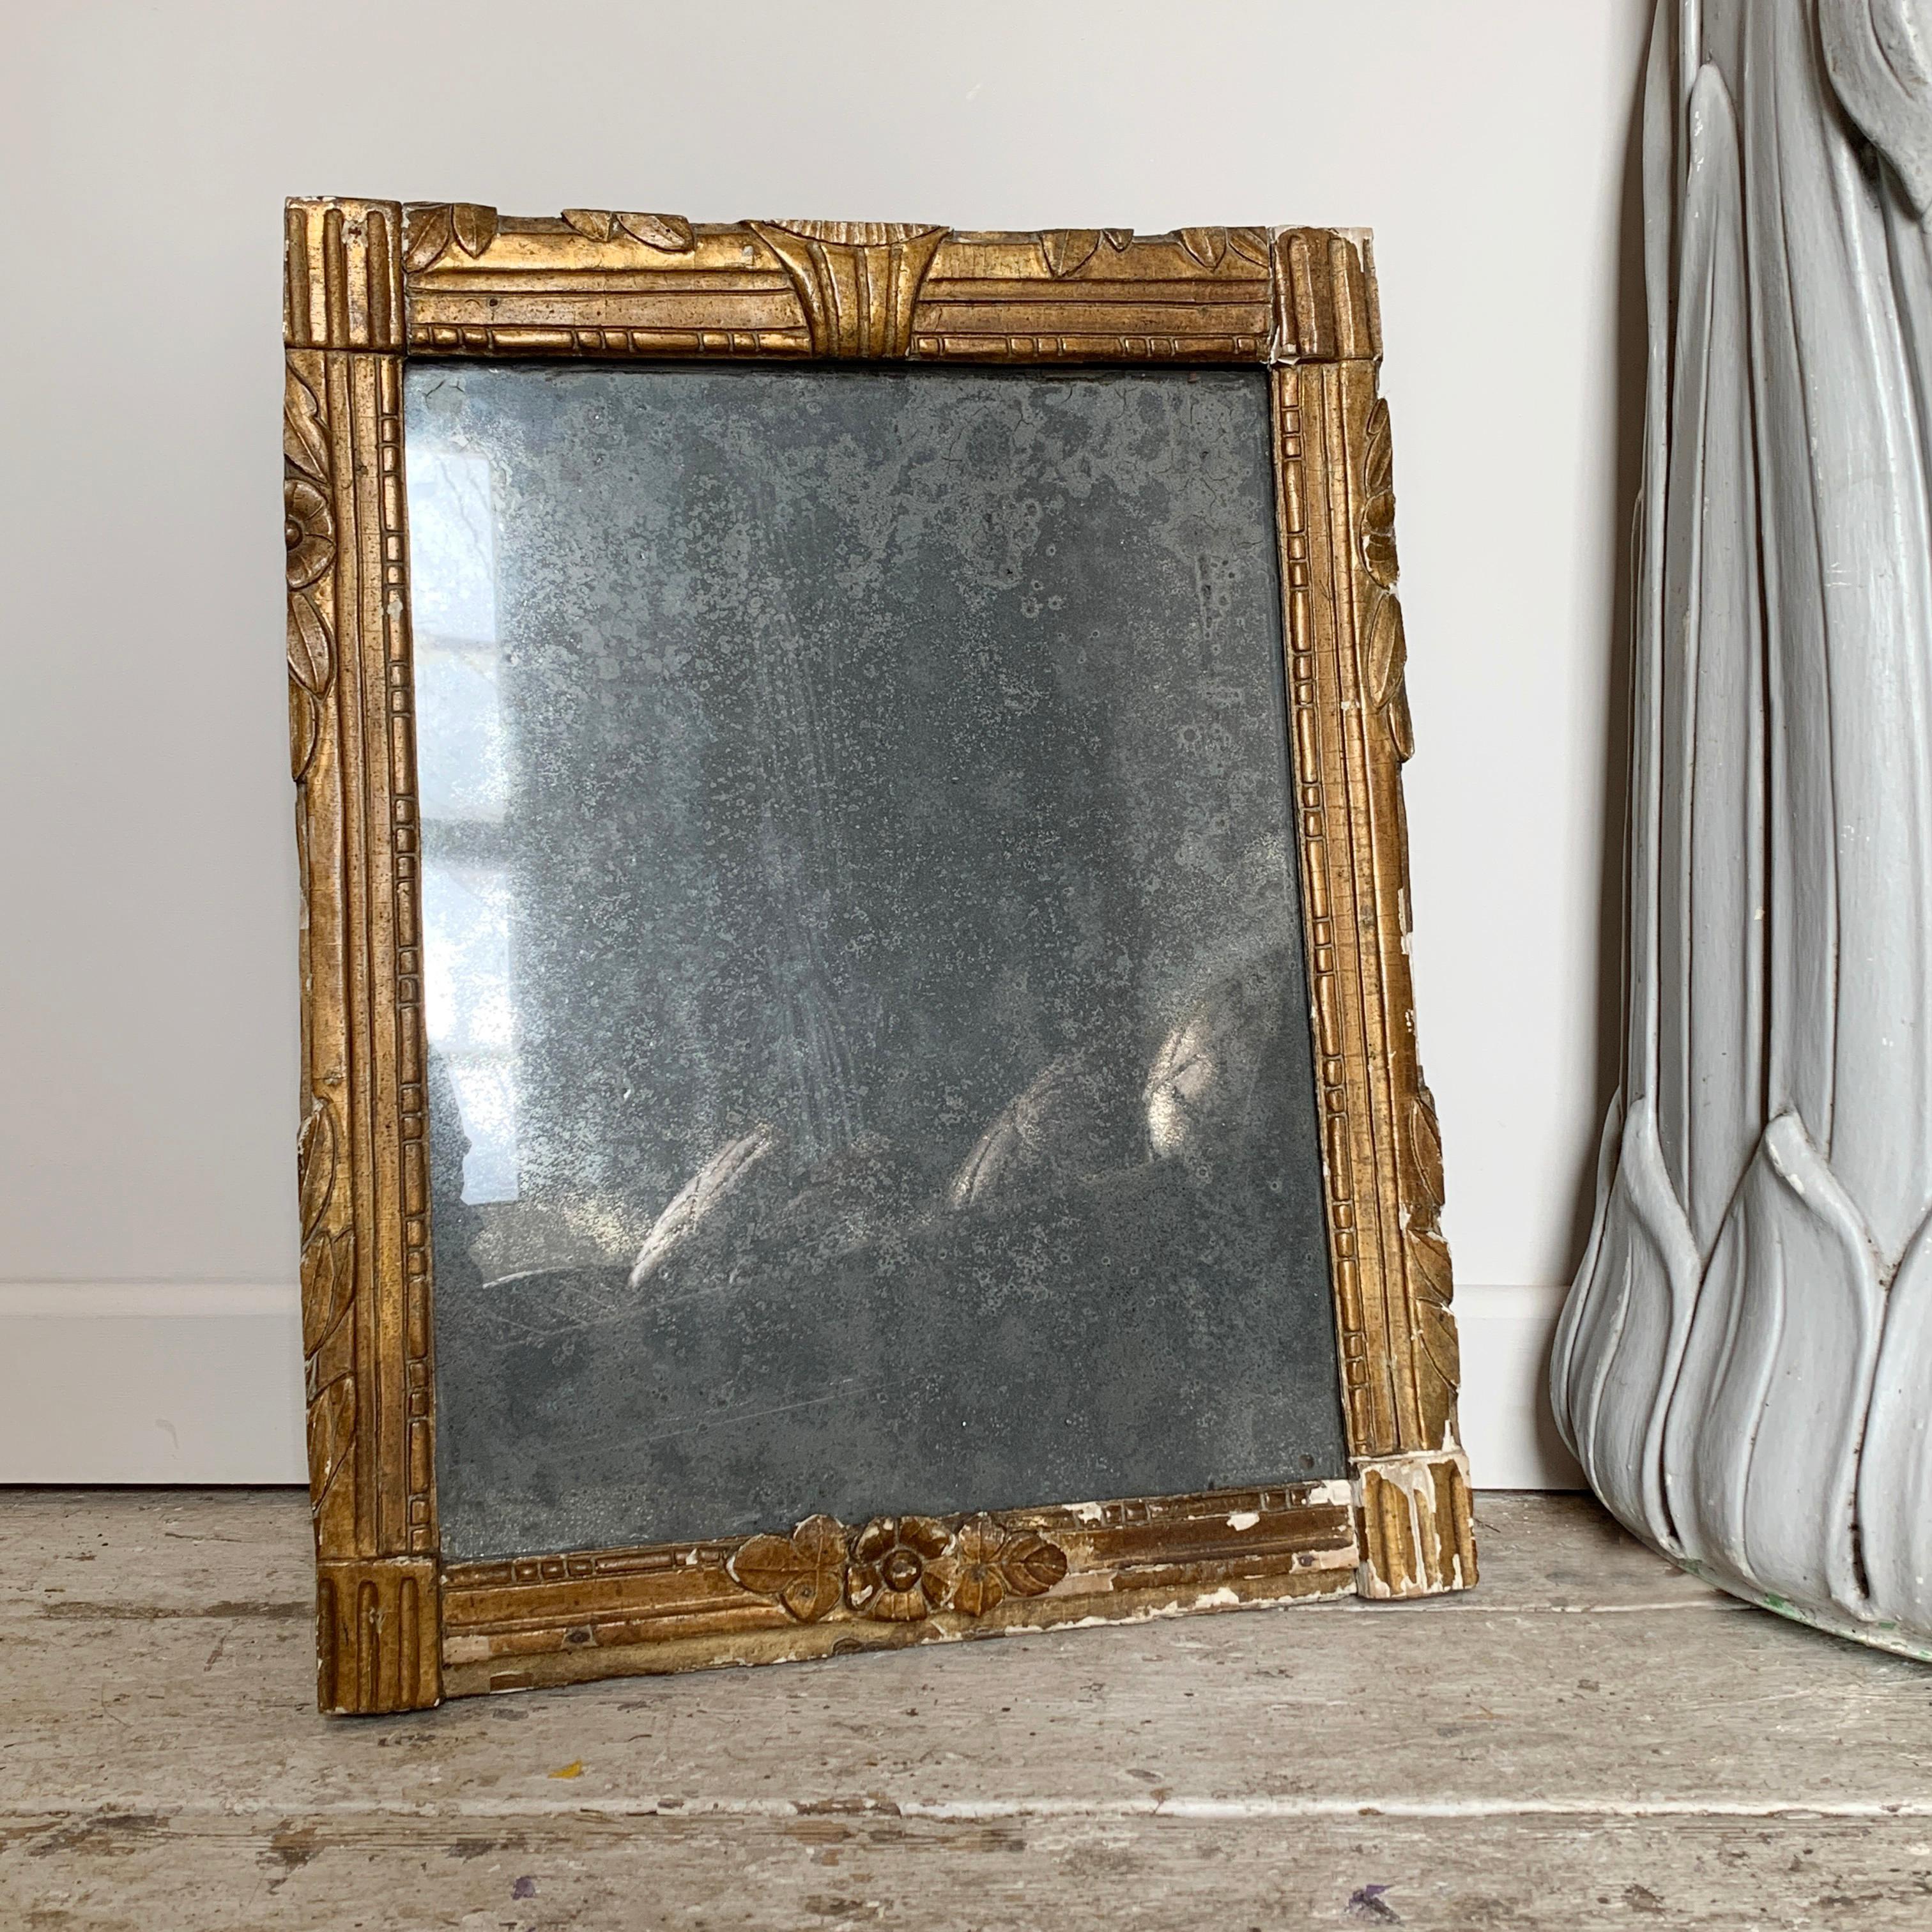 Early 19th century french mercury plate mirror
Gilt gesso over wood, with an incredible foxed silver/grey mercury glass, it barely reflects and is a true looking glass
Frame bears some signs of wear, and slight loss to small areas of the